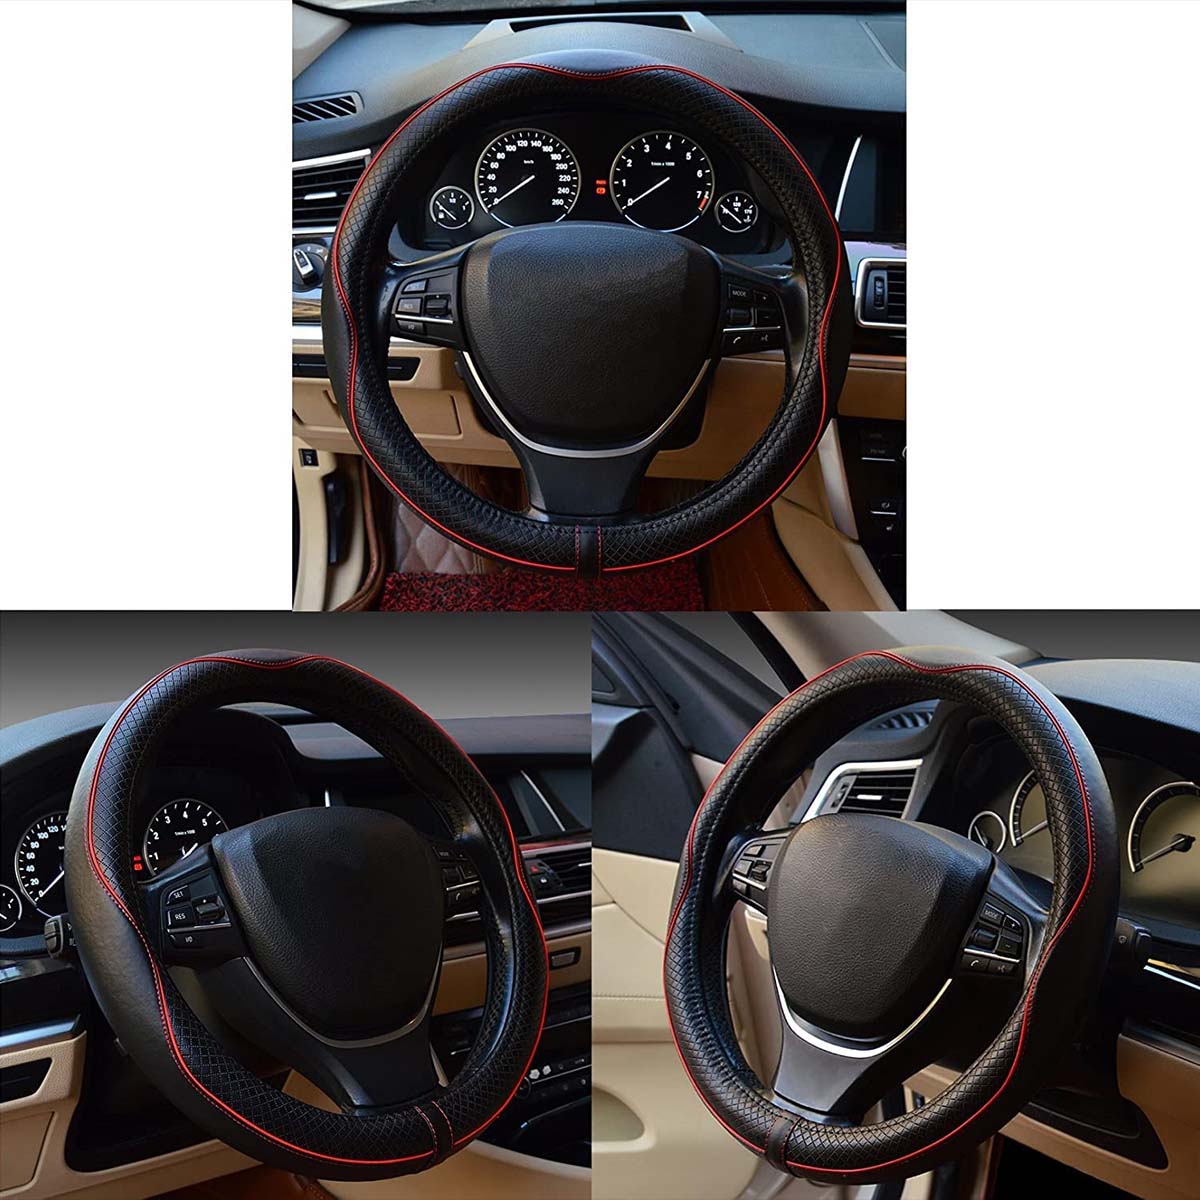 Car Steering Wheel Cover, Custom For Your Cars, Anti-Slip, Safety, Soft, Breathable, Heavy Duty, Thick, Full Surround, Sports Style, Car Accessories VE18990